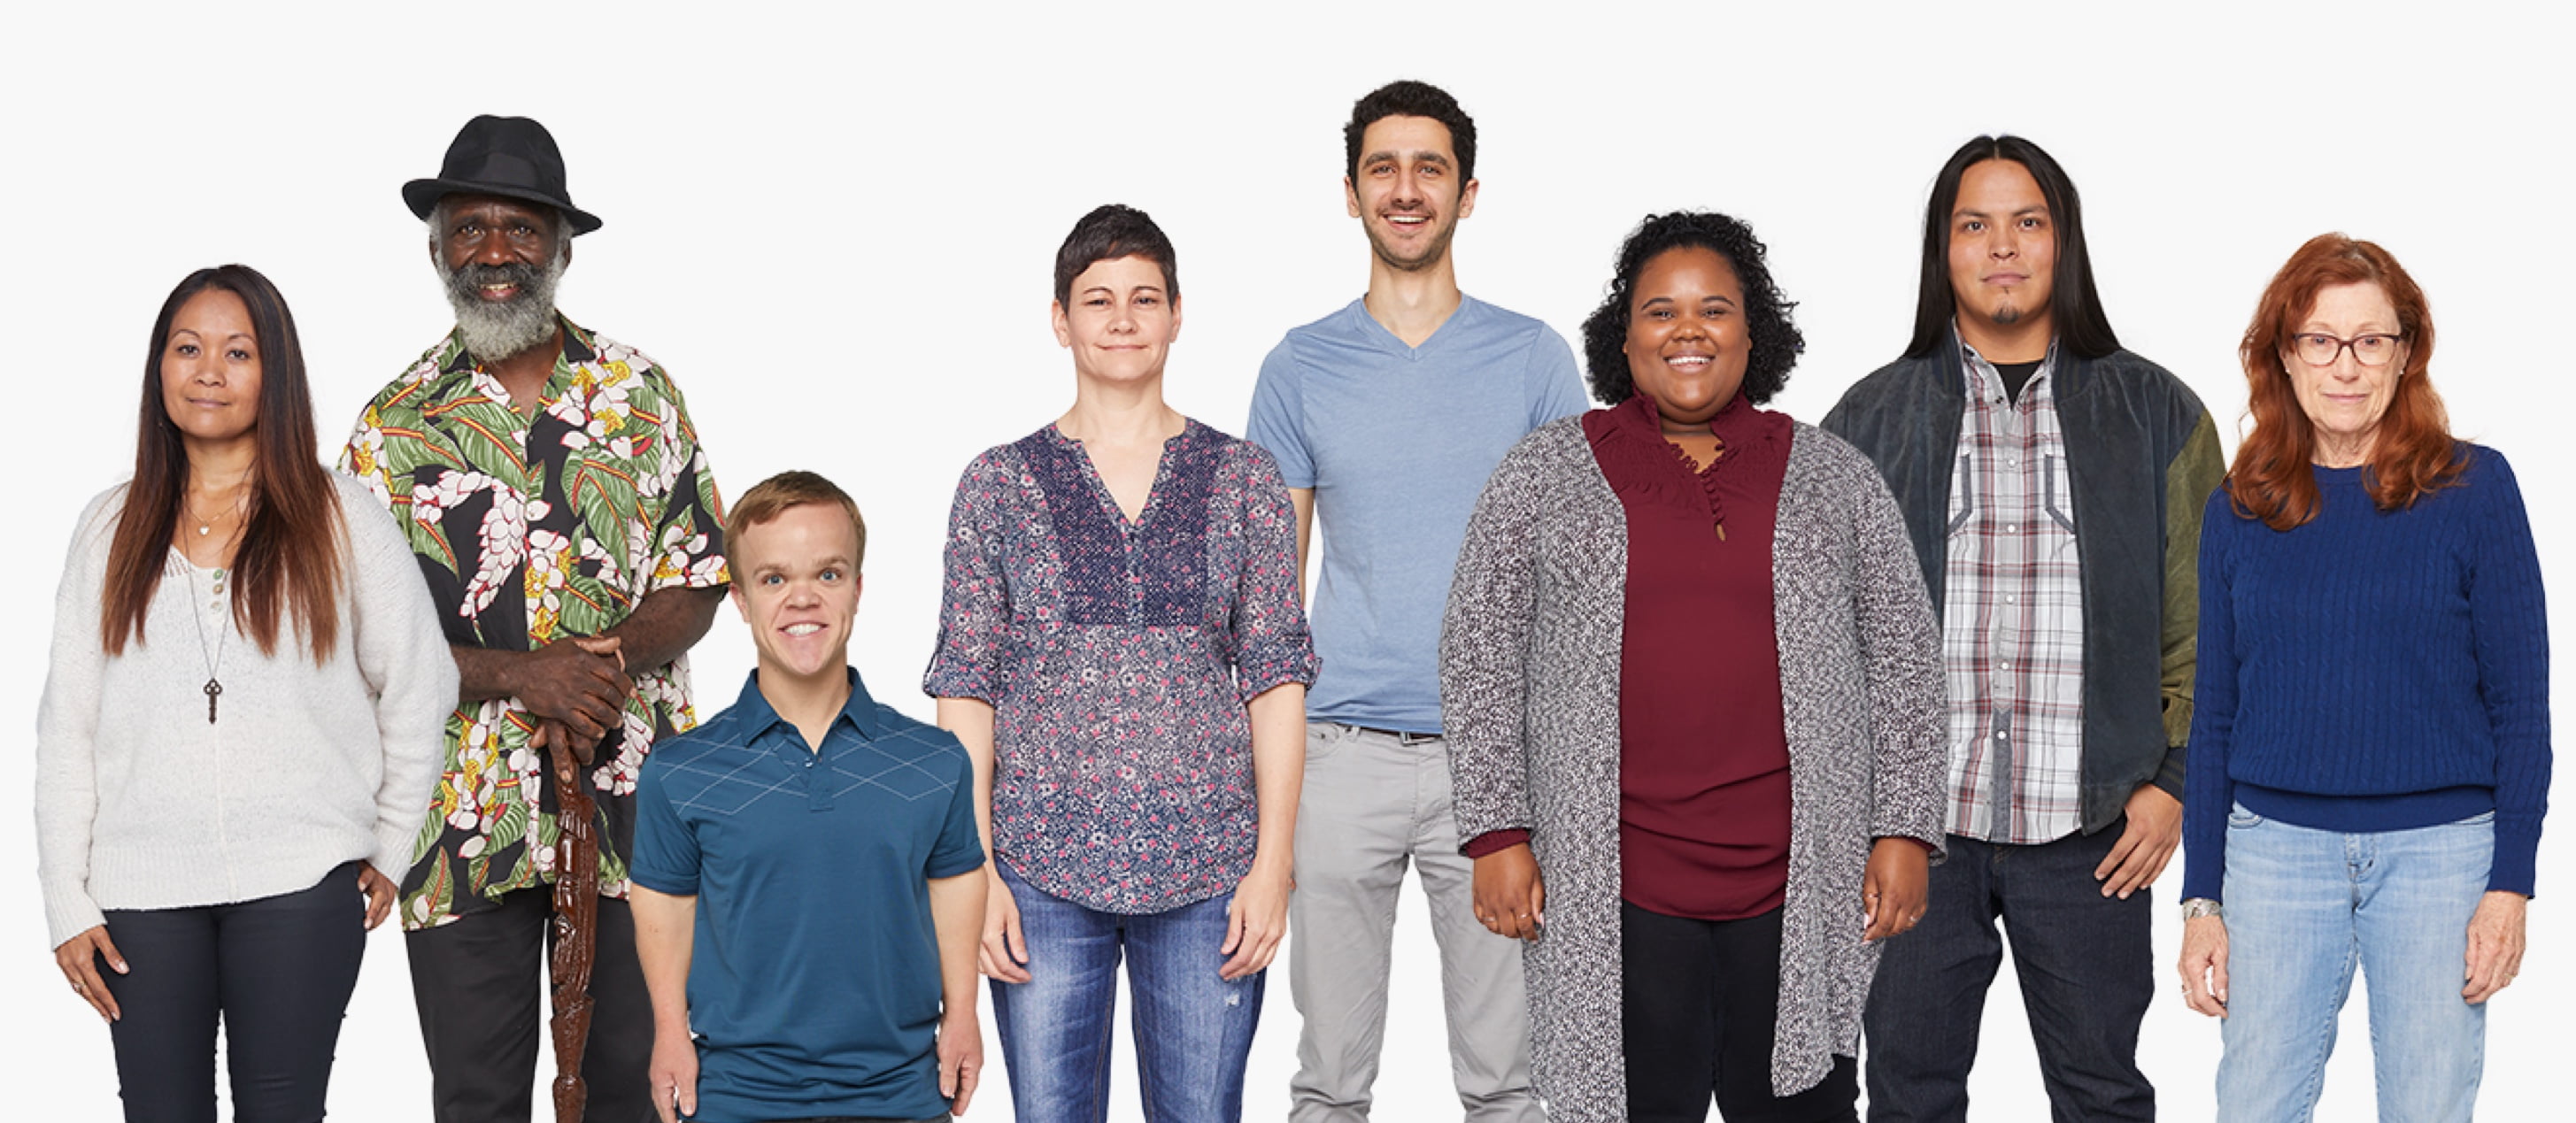 Image of diverse group of people smiling